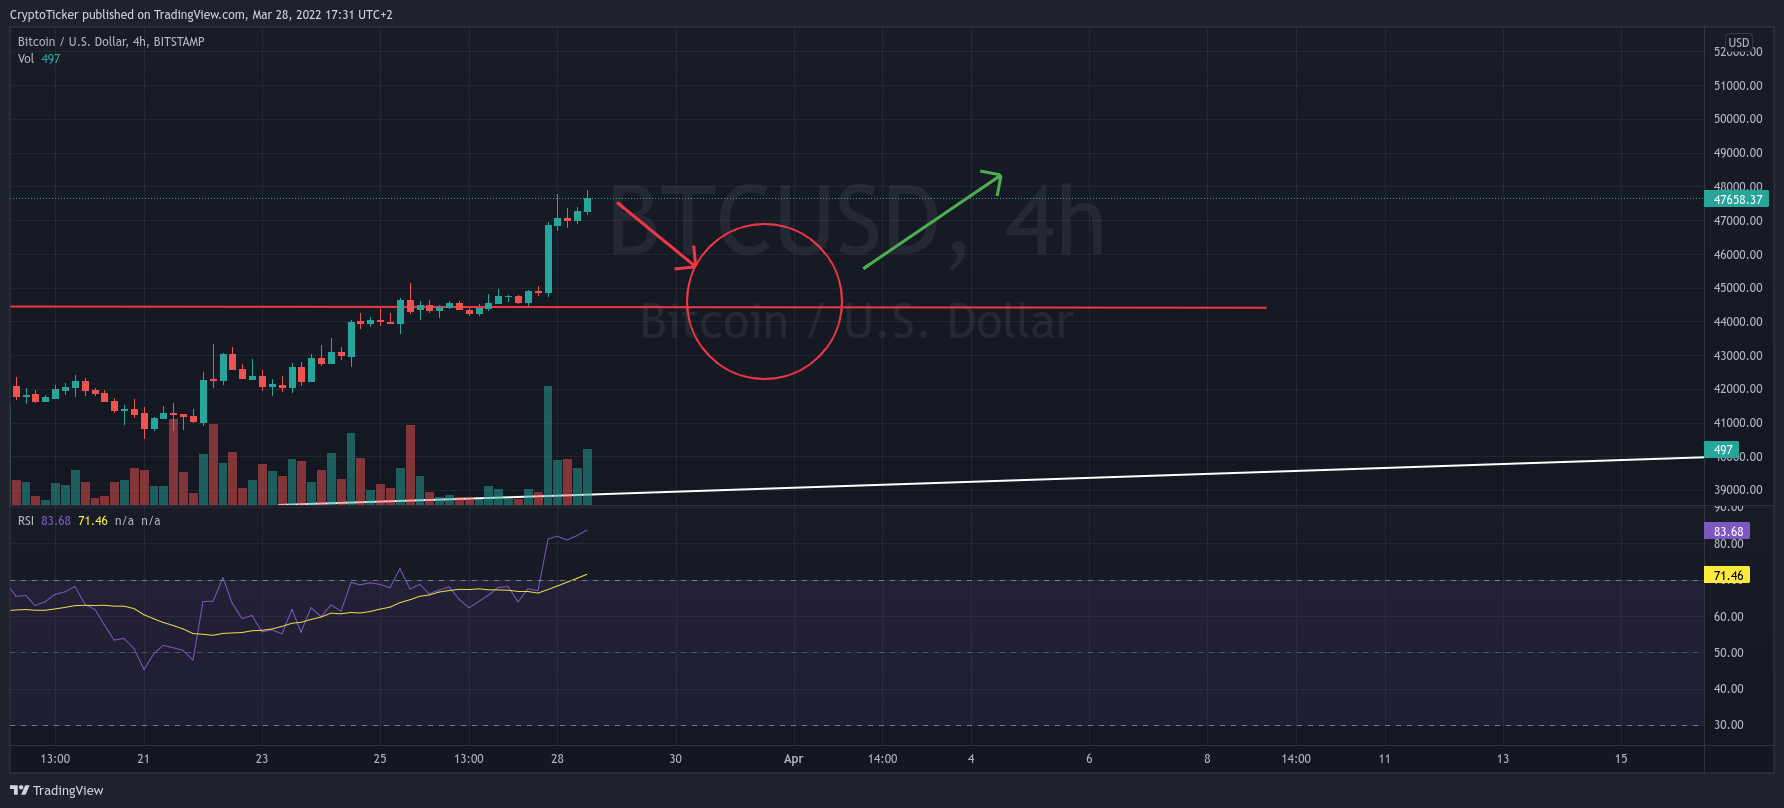 BTC/USD 4-hours chart showing the potential retracement of Bitcoin